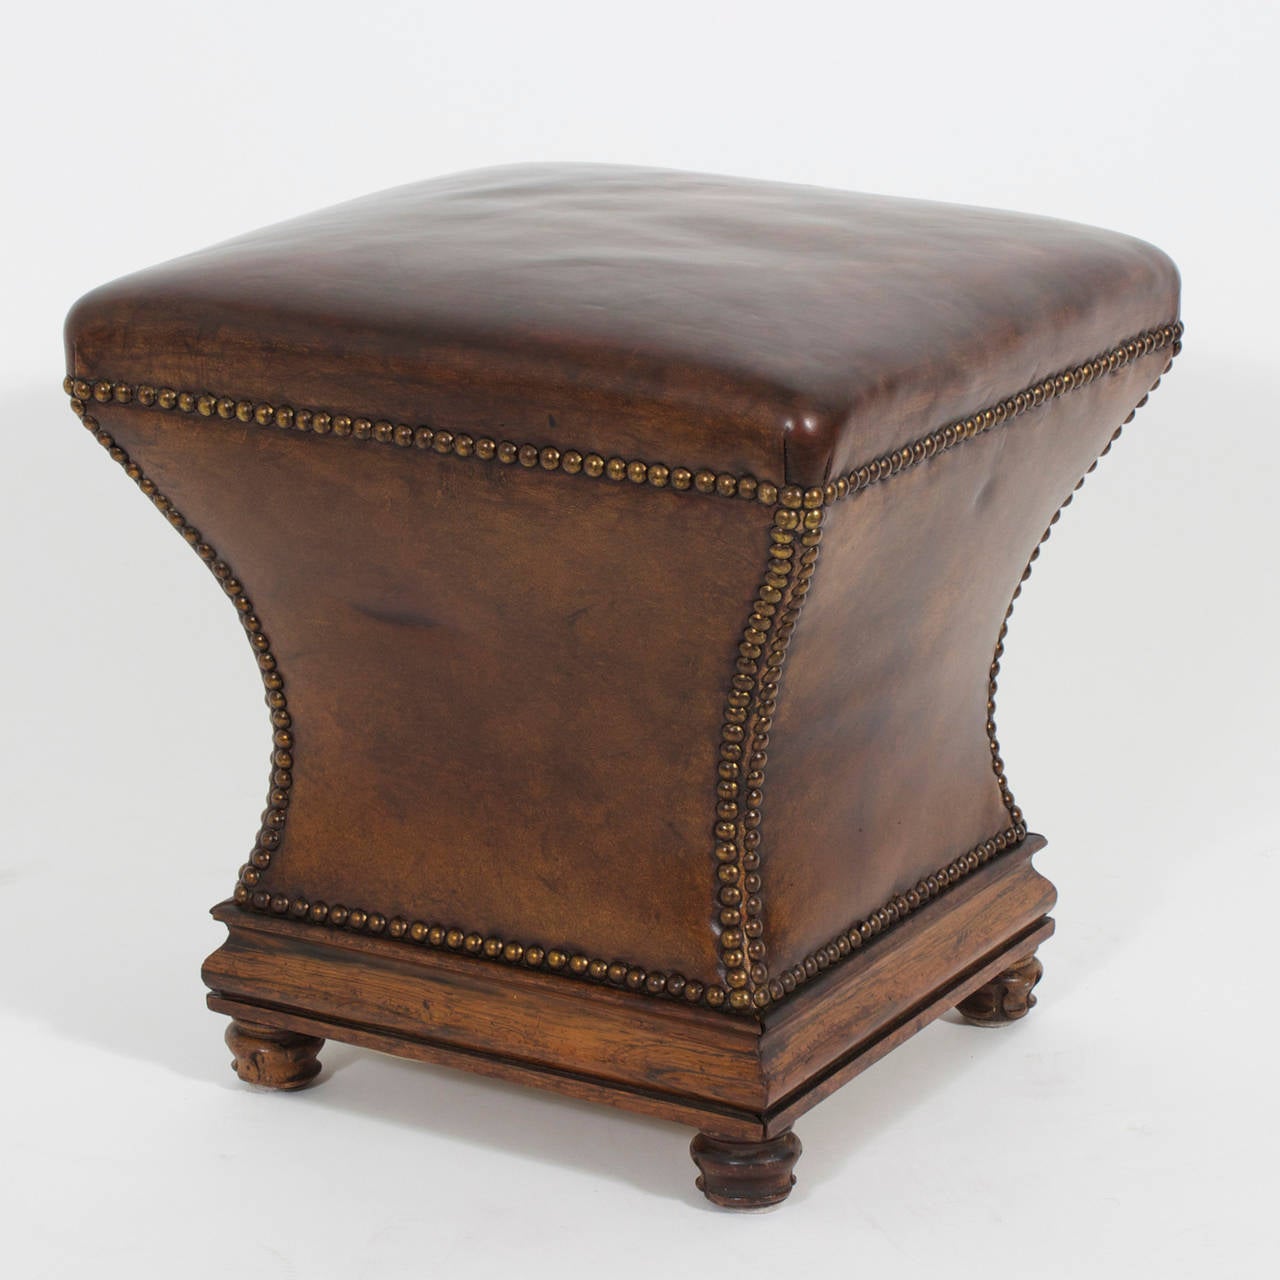 A pair of brown leather stools or ottomans clad in thick leather with brass tack concave outlines over a wooden base on turned and carved inverted tulip feet. Handsome, classic with a twist of gentlemen's club. Newly polished.